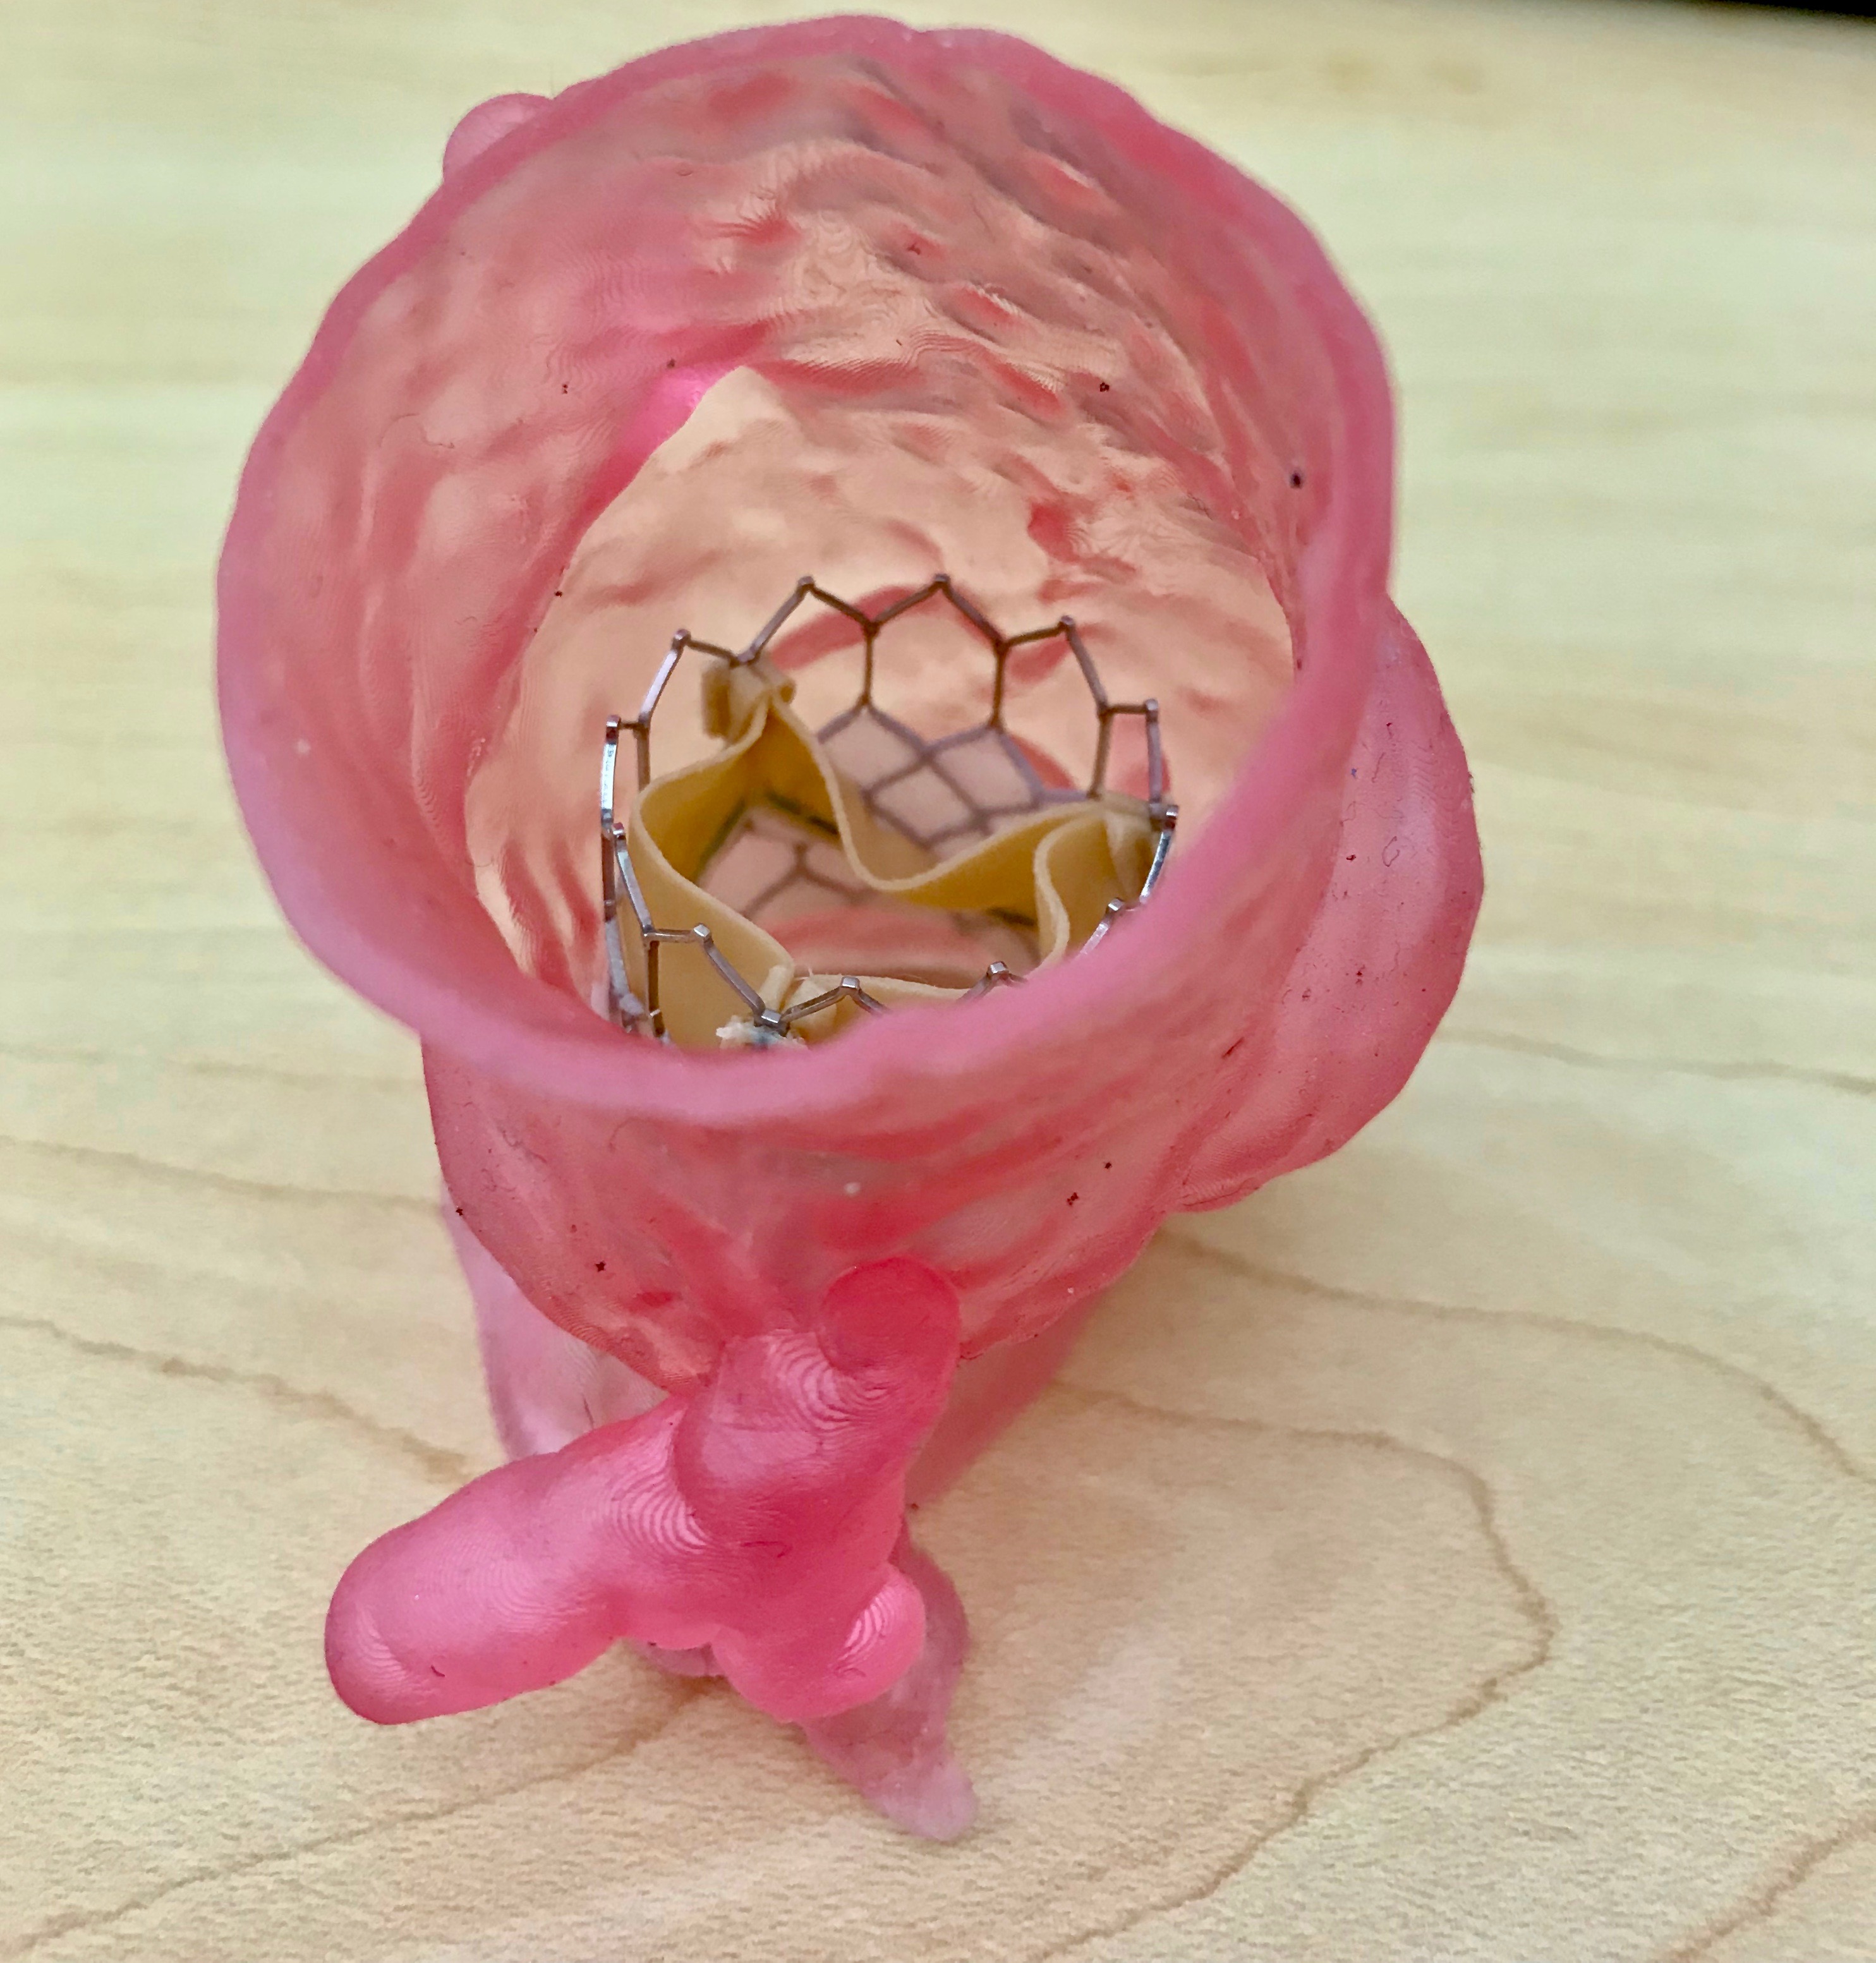 3D printed model of a patient's aortic valve with a transcatheter aortic valve replacement (TAVR) bioprosthetic placed into the 3D printed model for procedural planning purposes. Photo via VA Puget Sound Health Care System.